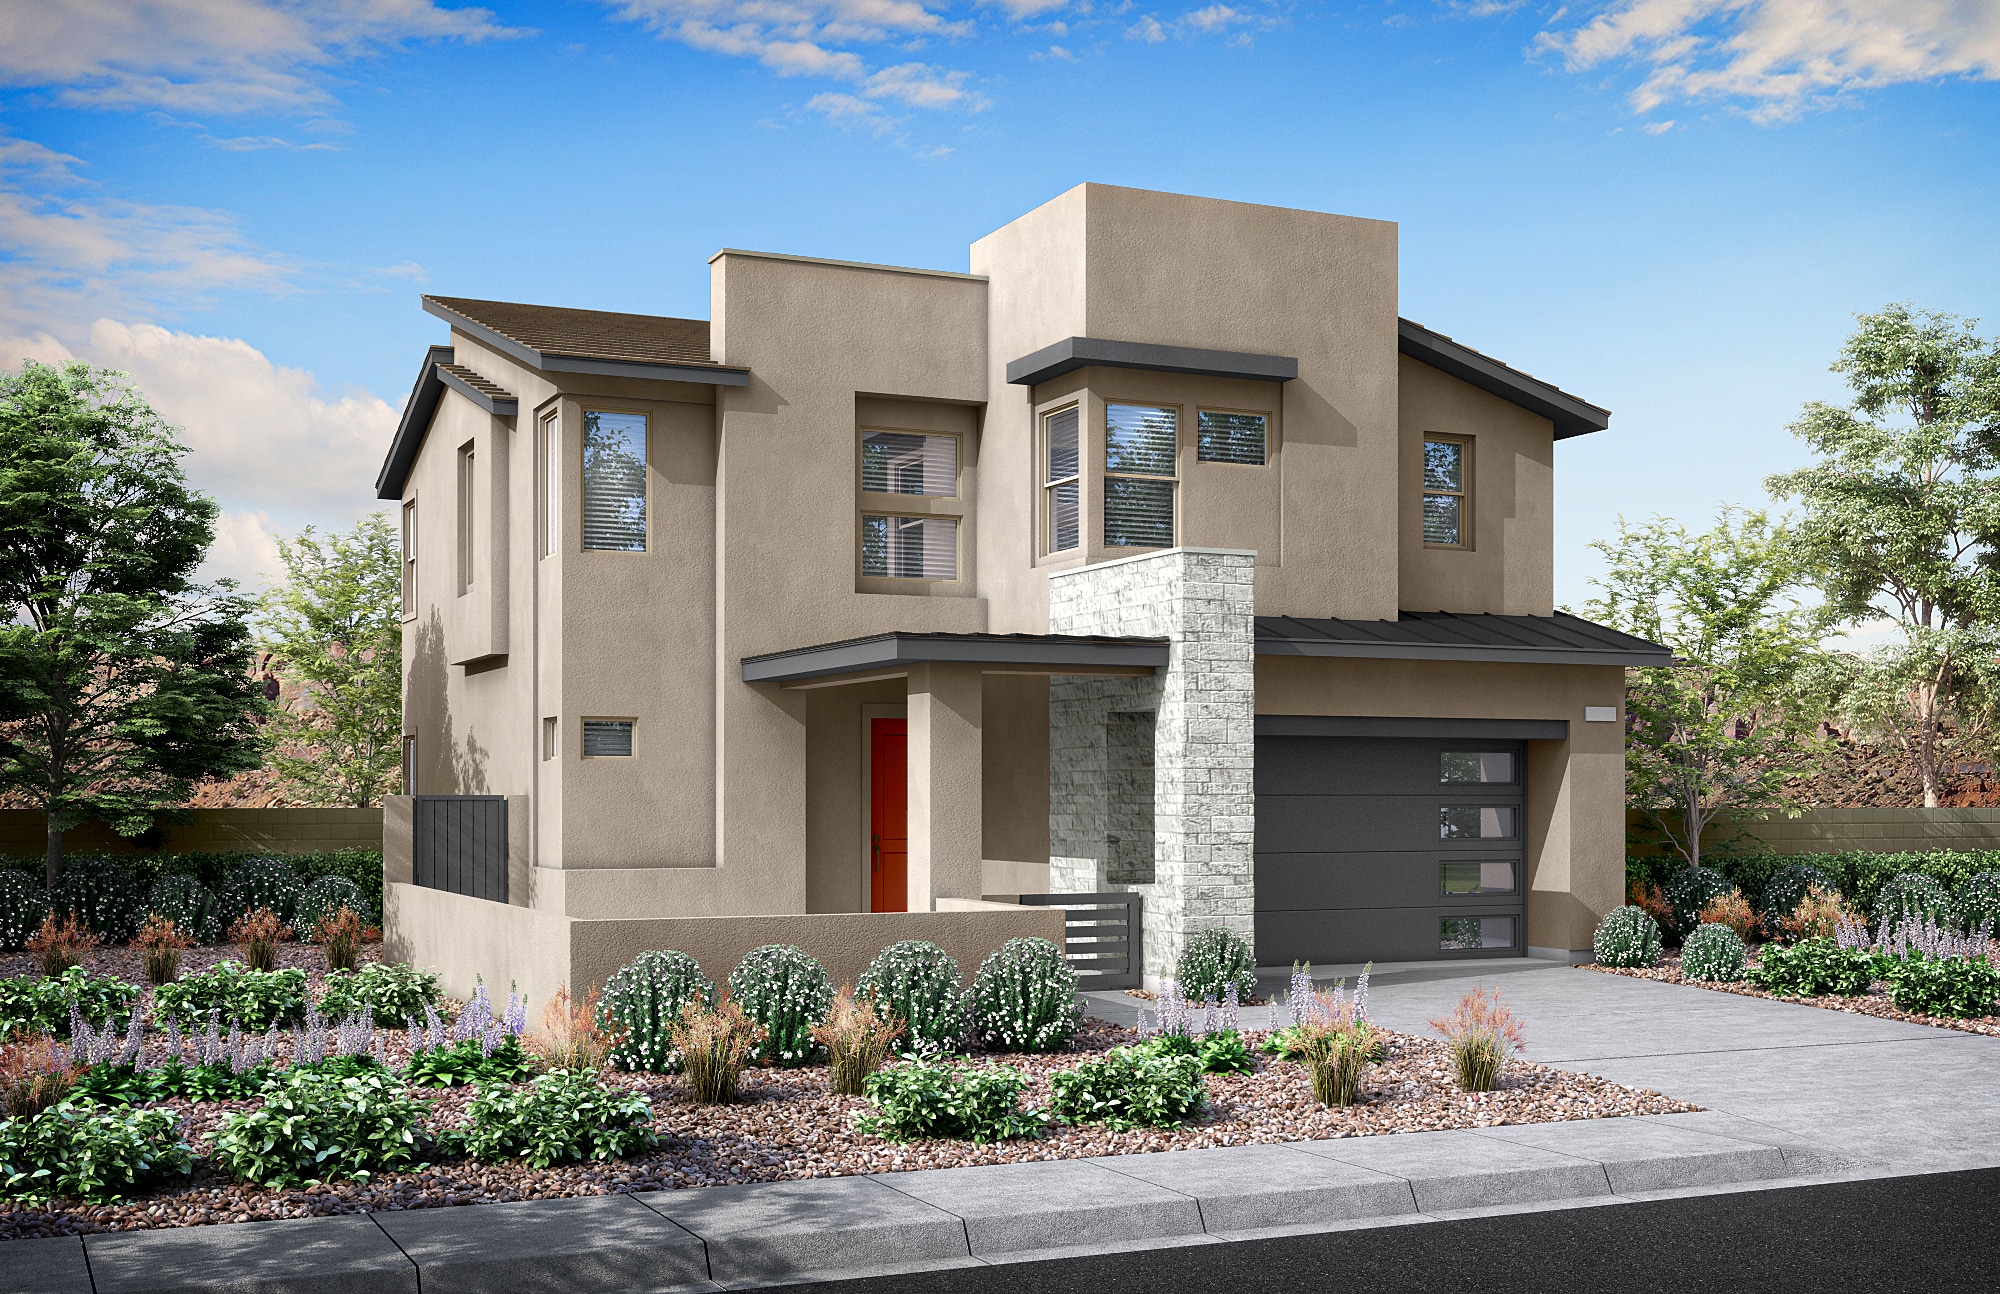 Front Elevation B of Plan 1 at Arroyo's Edge by Tri Pointe Homes